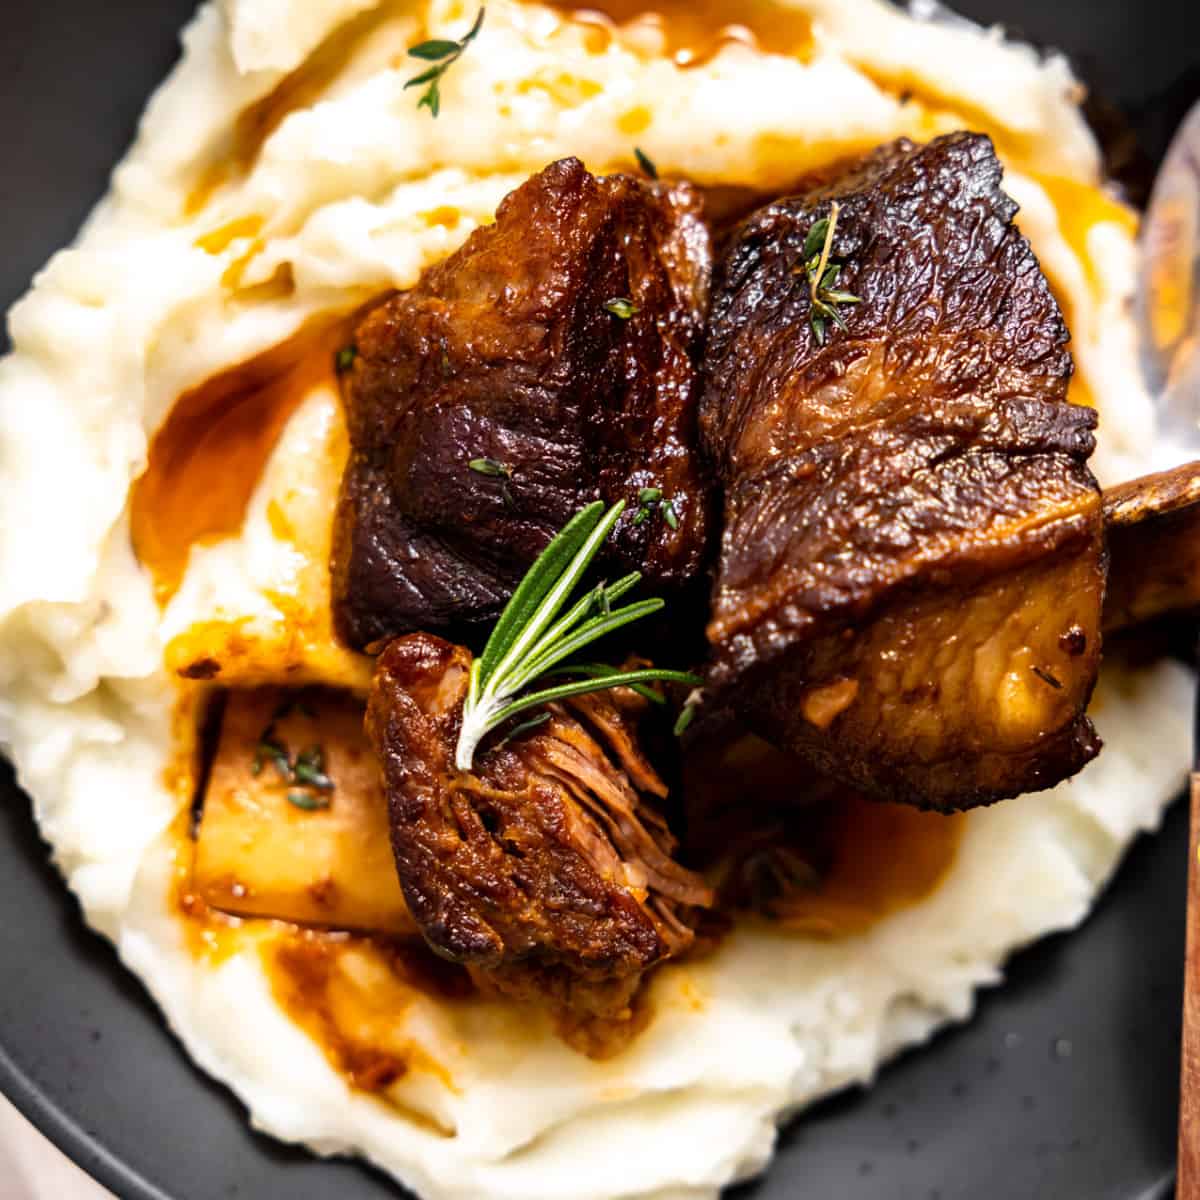 Braised short ribs with fresh herbs.